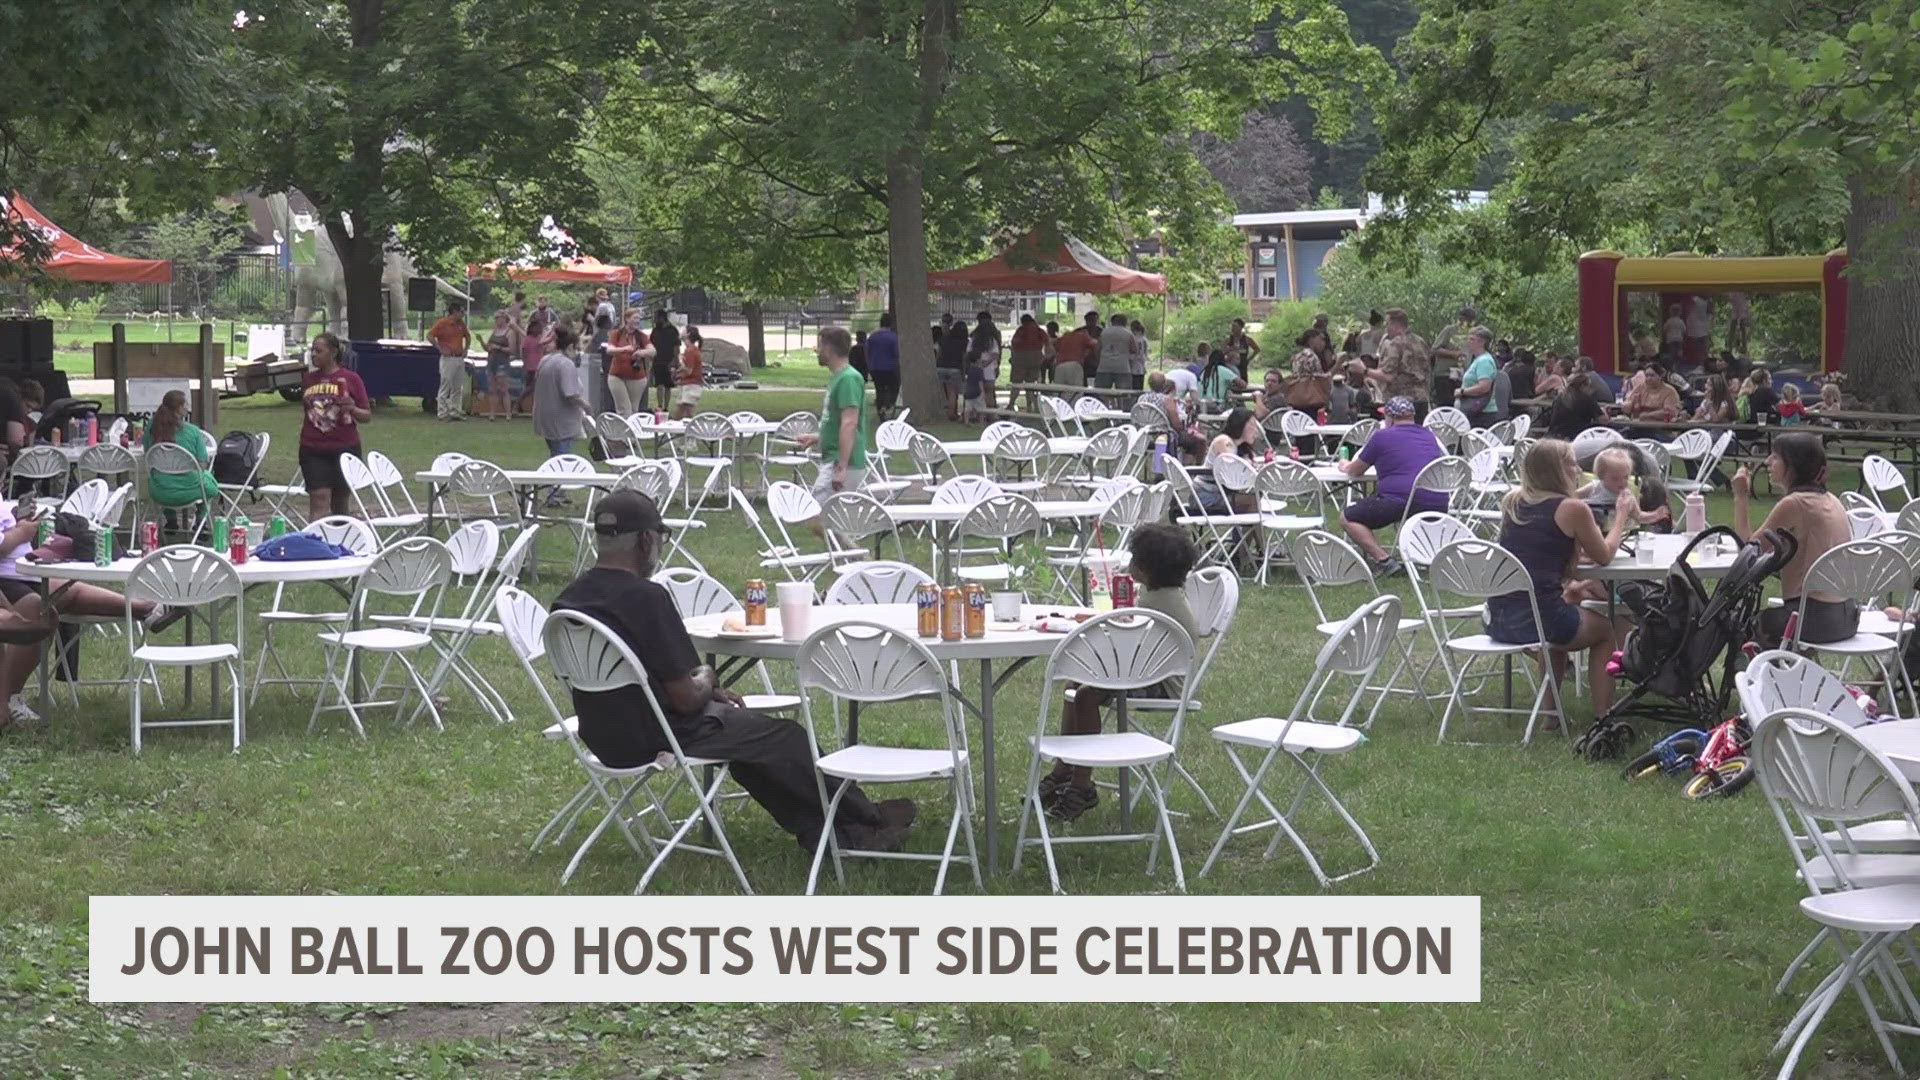 Hundreds of people came out to the zoo to enjoy a night of live music, food and activities for children.